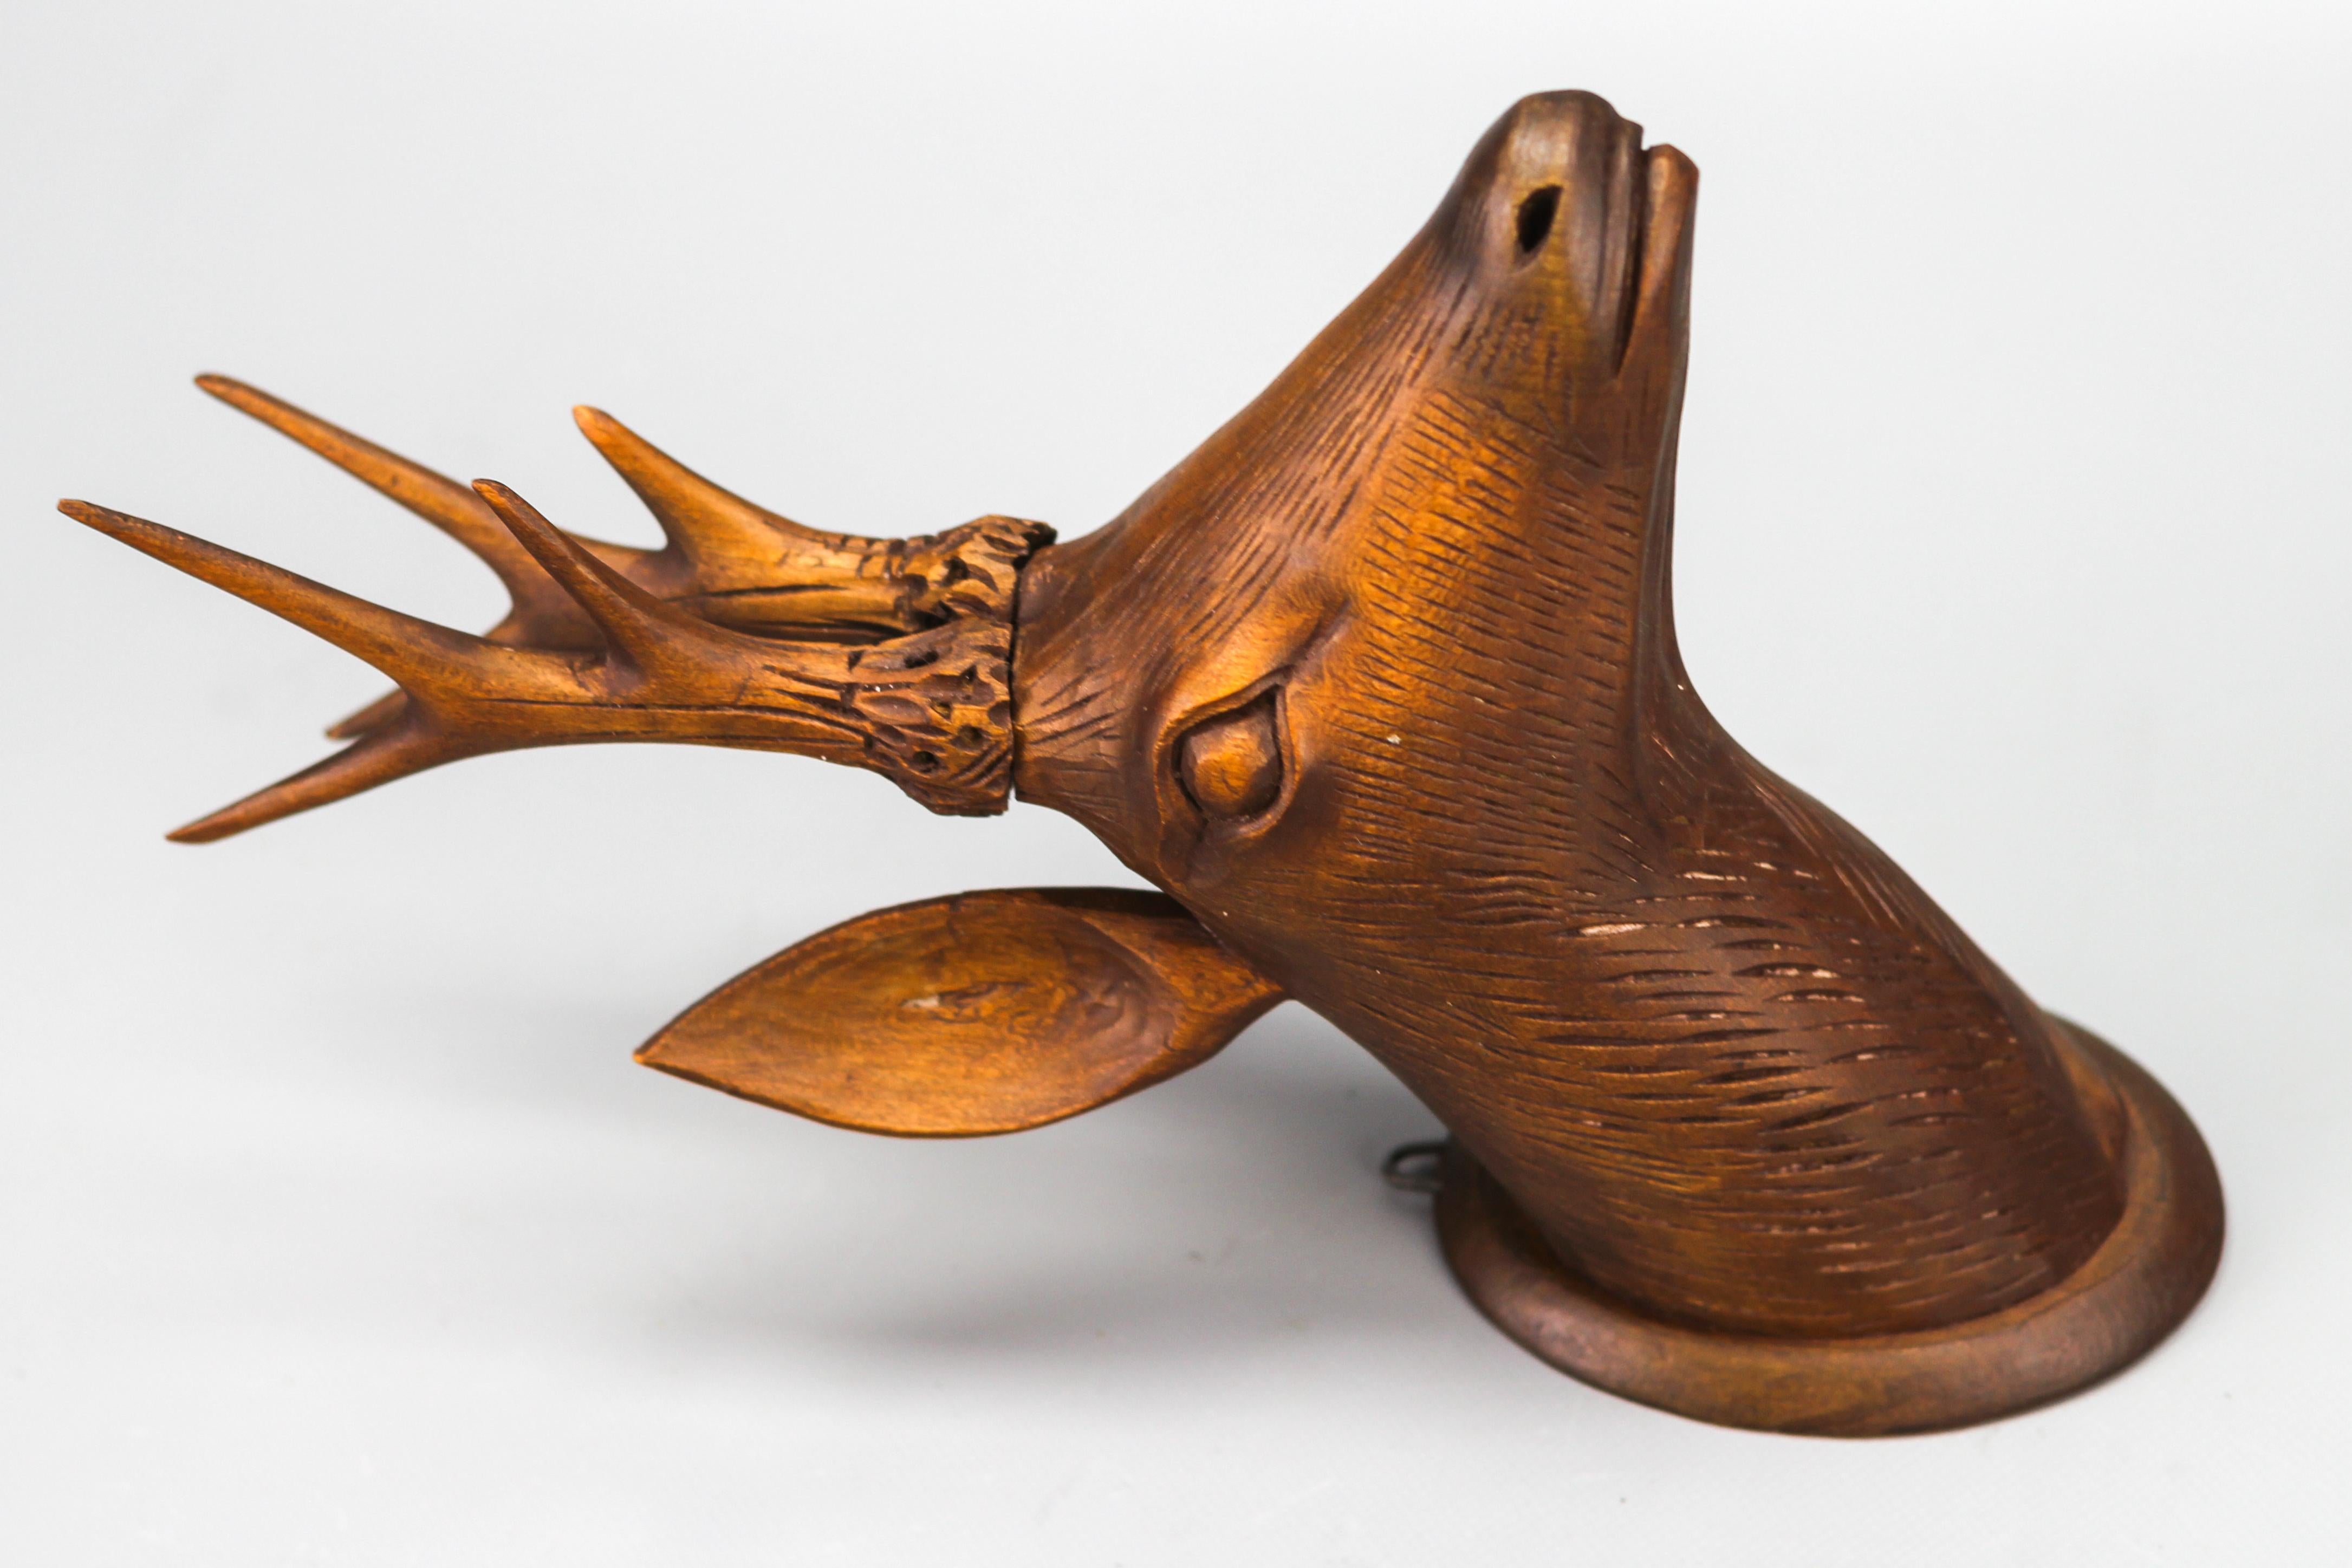 Antique Carved Wooden Deer's Head Wall Decoration, Germany, from ca. 1920
A beautiful antique wall decoration - entirely from linden wood carved deer's head on an oval base, toned in dark brown color.
Dimensions: height: 30 cm / 11.81 in; width: 10